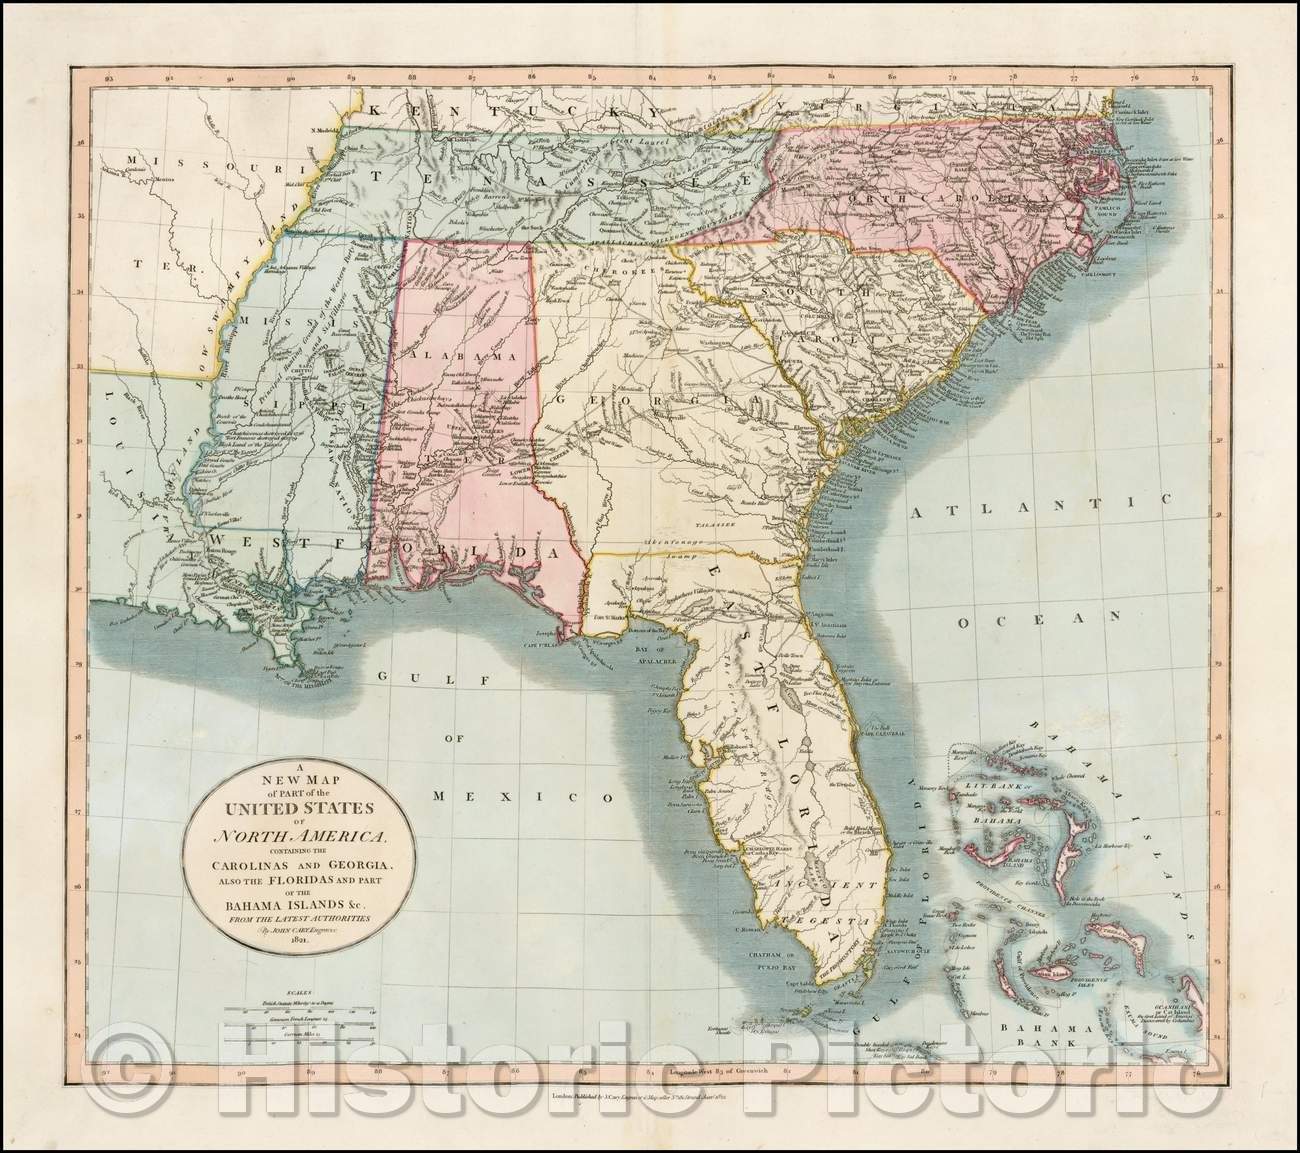 Historic Map - Part of the United States of North America Containing The Carolinas And Georgia. Also The Floridas And Part Of The Bahama Islands &c, 1821 - Vintage Wall Art